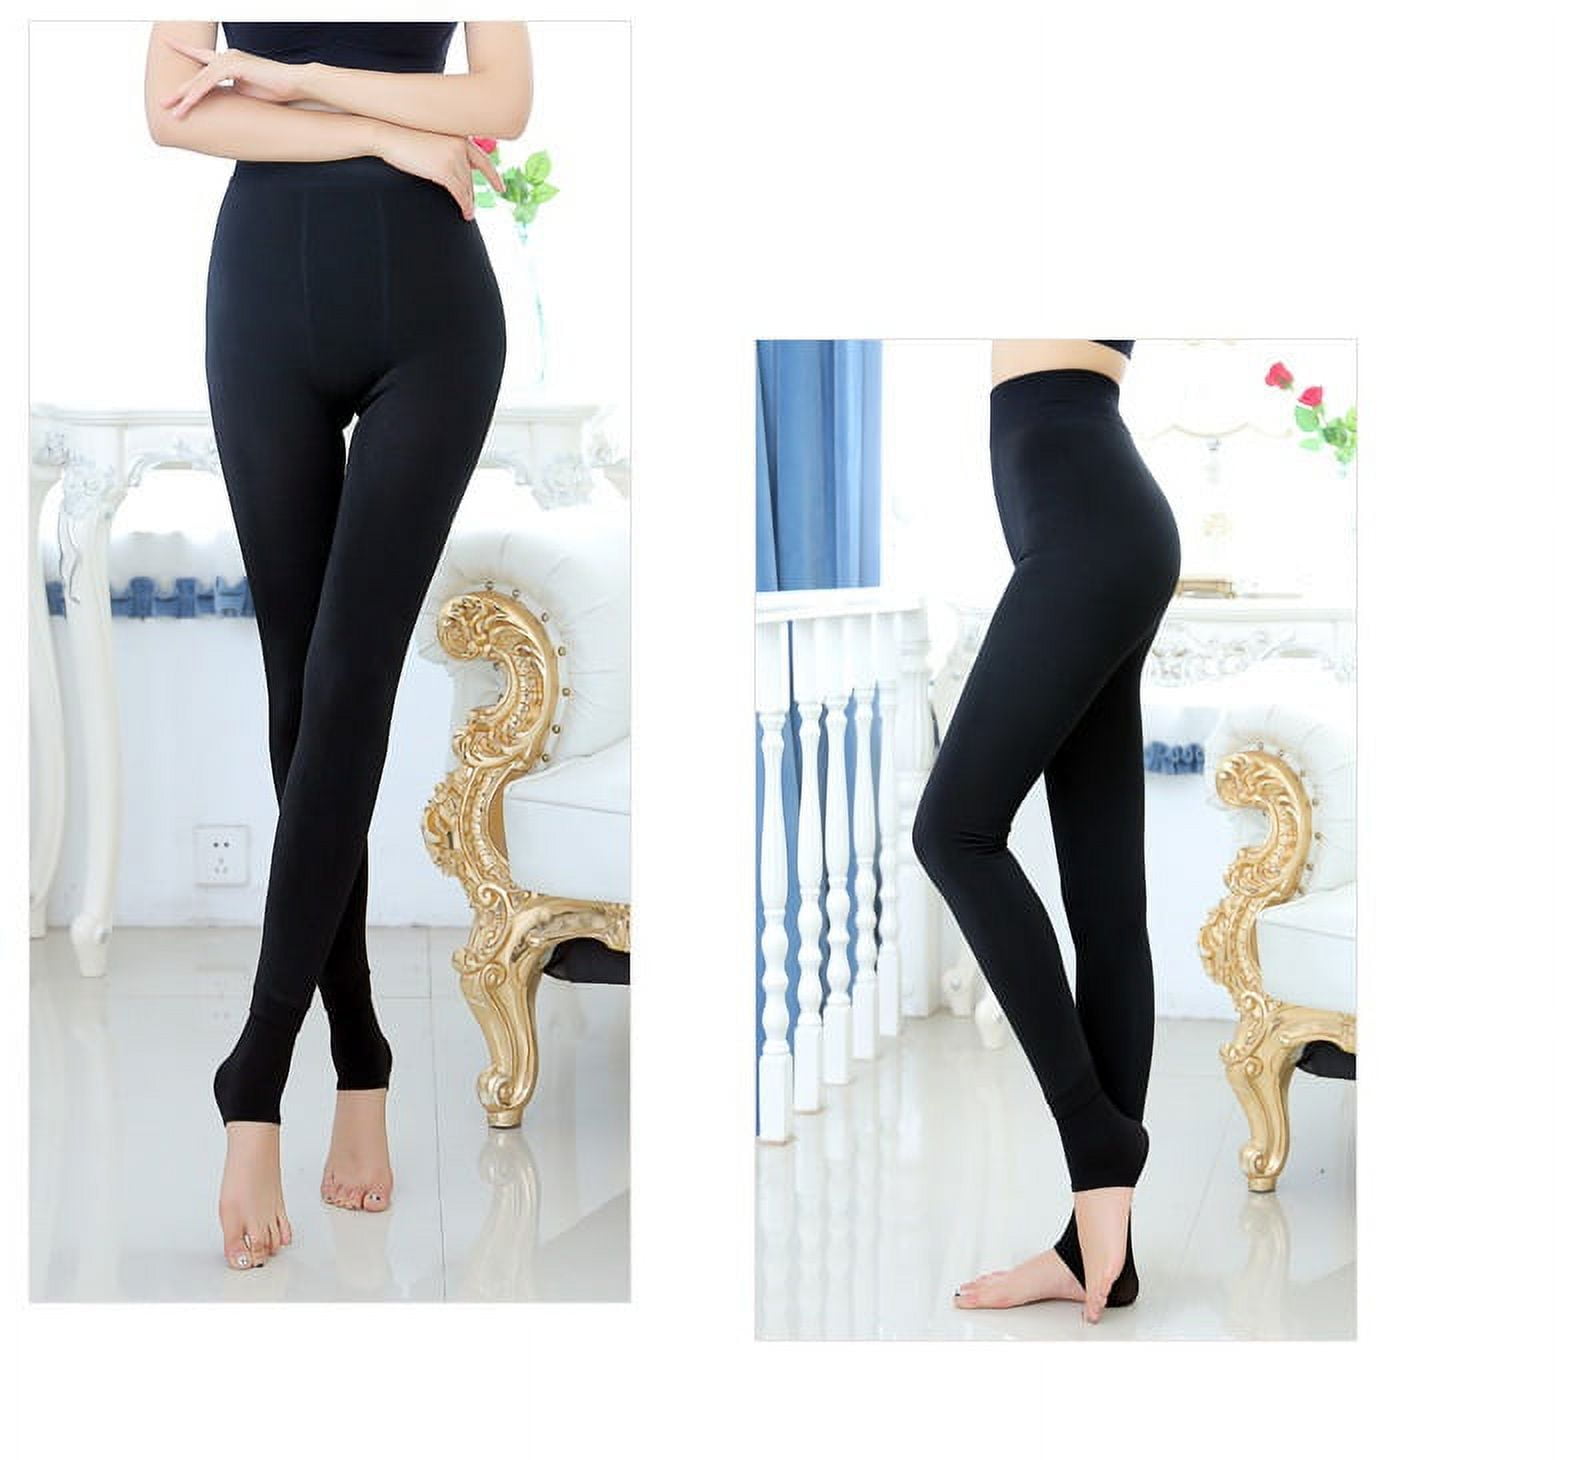 Women Magic Extra Thick Warm Winter Double Lined Stretch Thermal Fleece  Tights Flaw Less Sheer Tights Leg Warmer